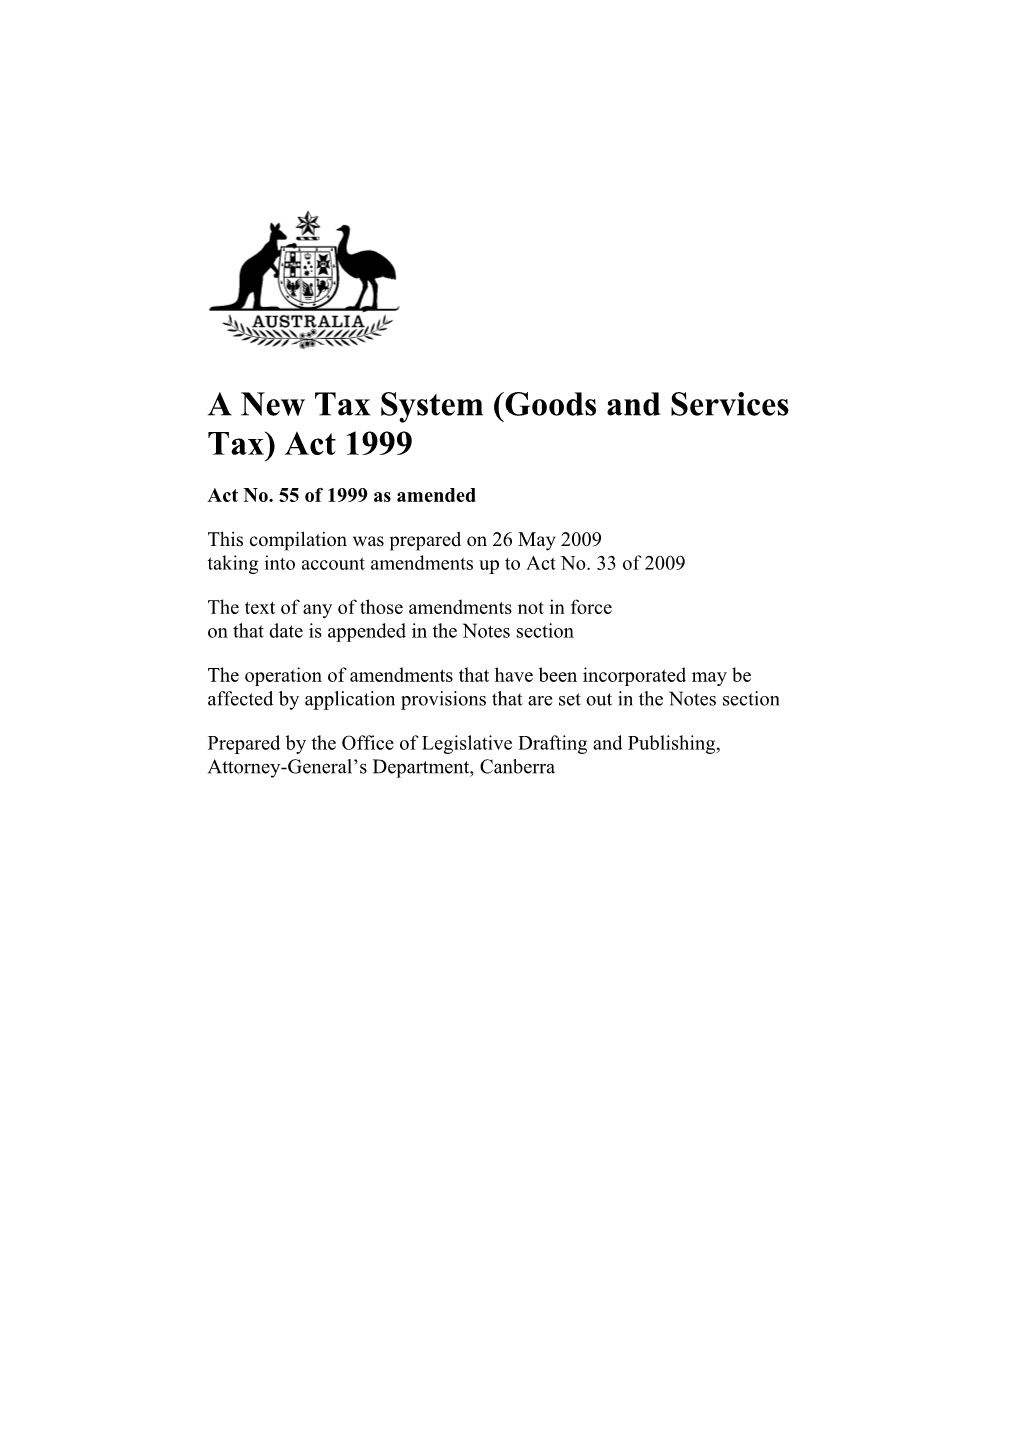 A New Tax System (Goods and Services Tax) Act 1999